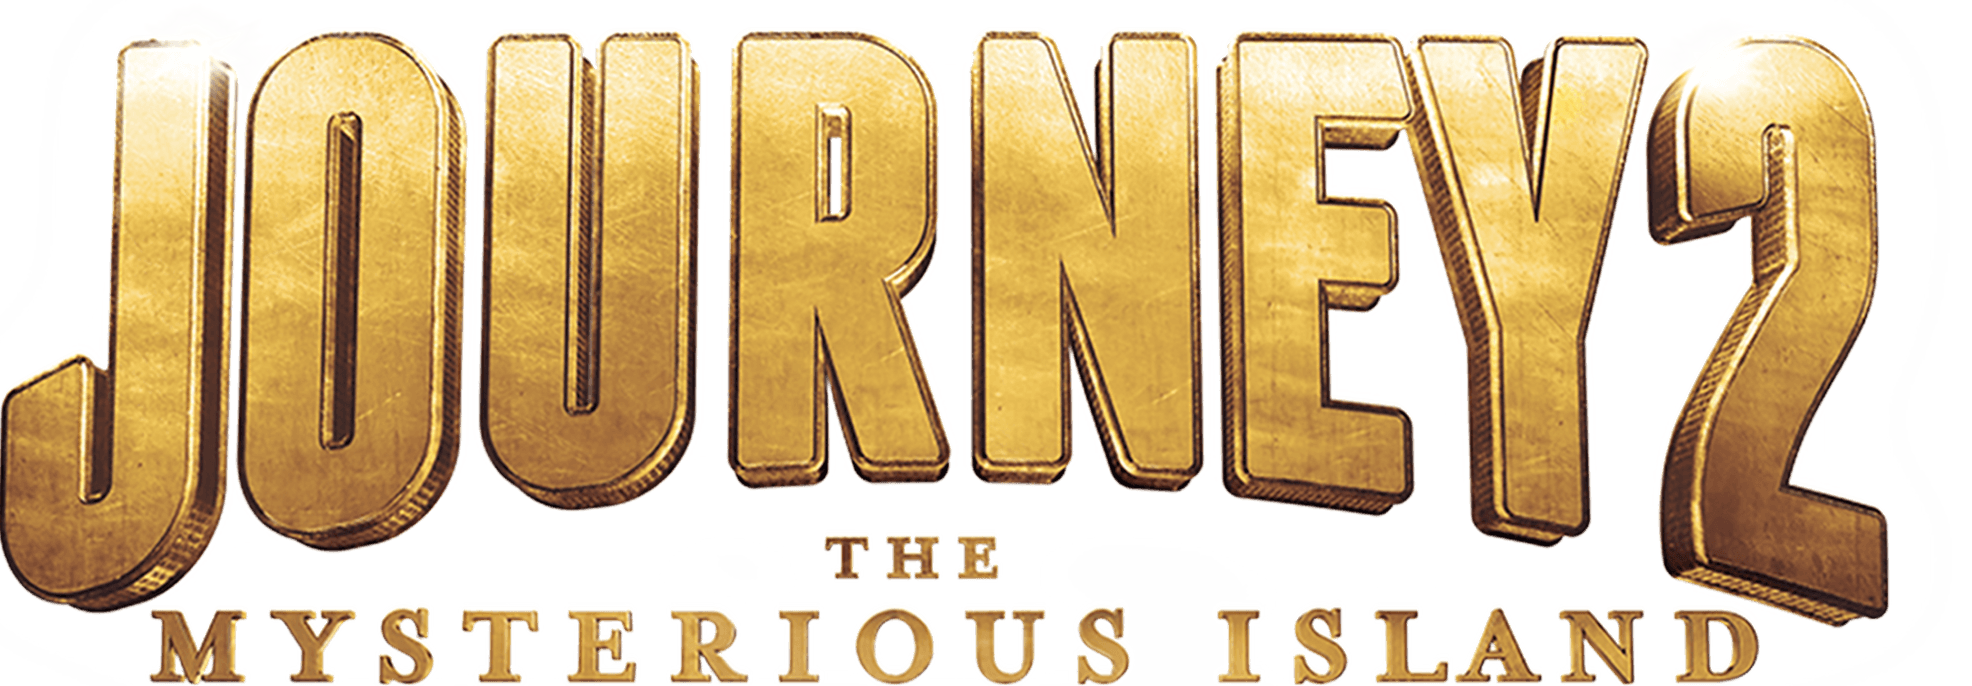 Journey 2: The Mysterious Island logo